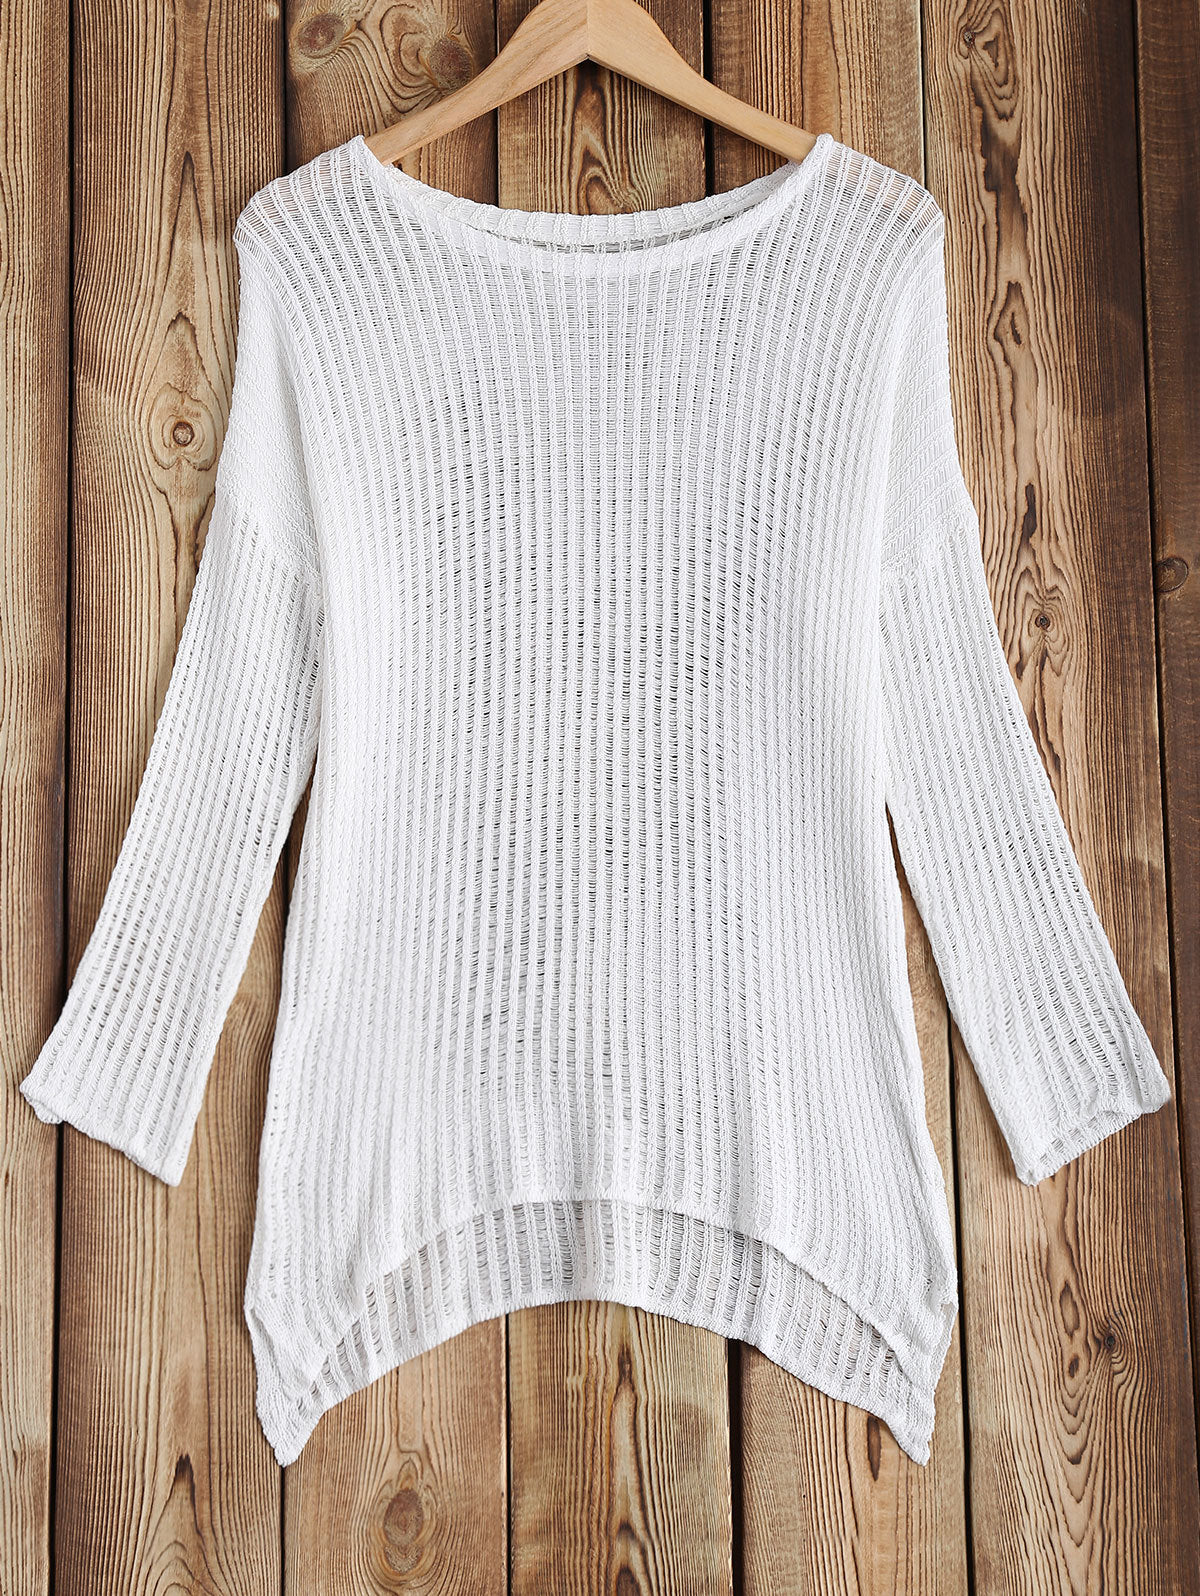 Hollow Knit Beach Cover Up